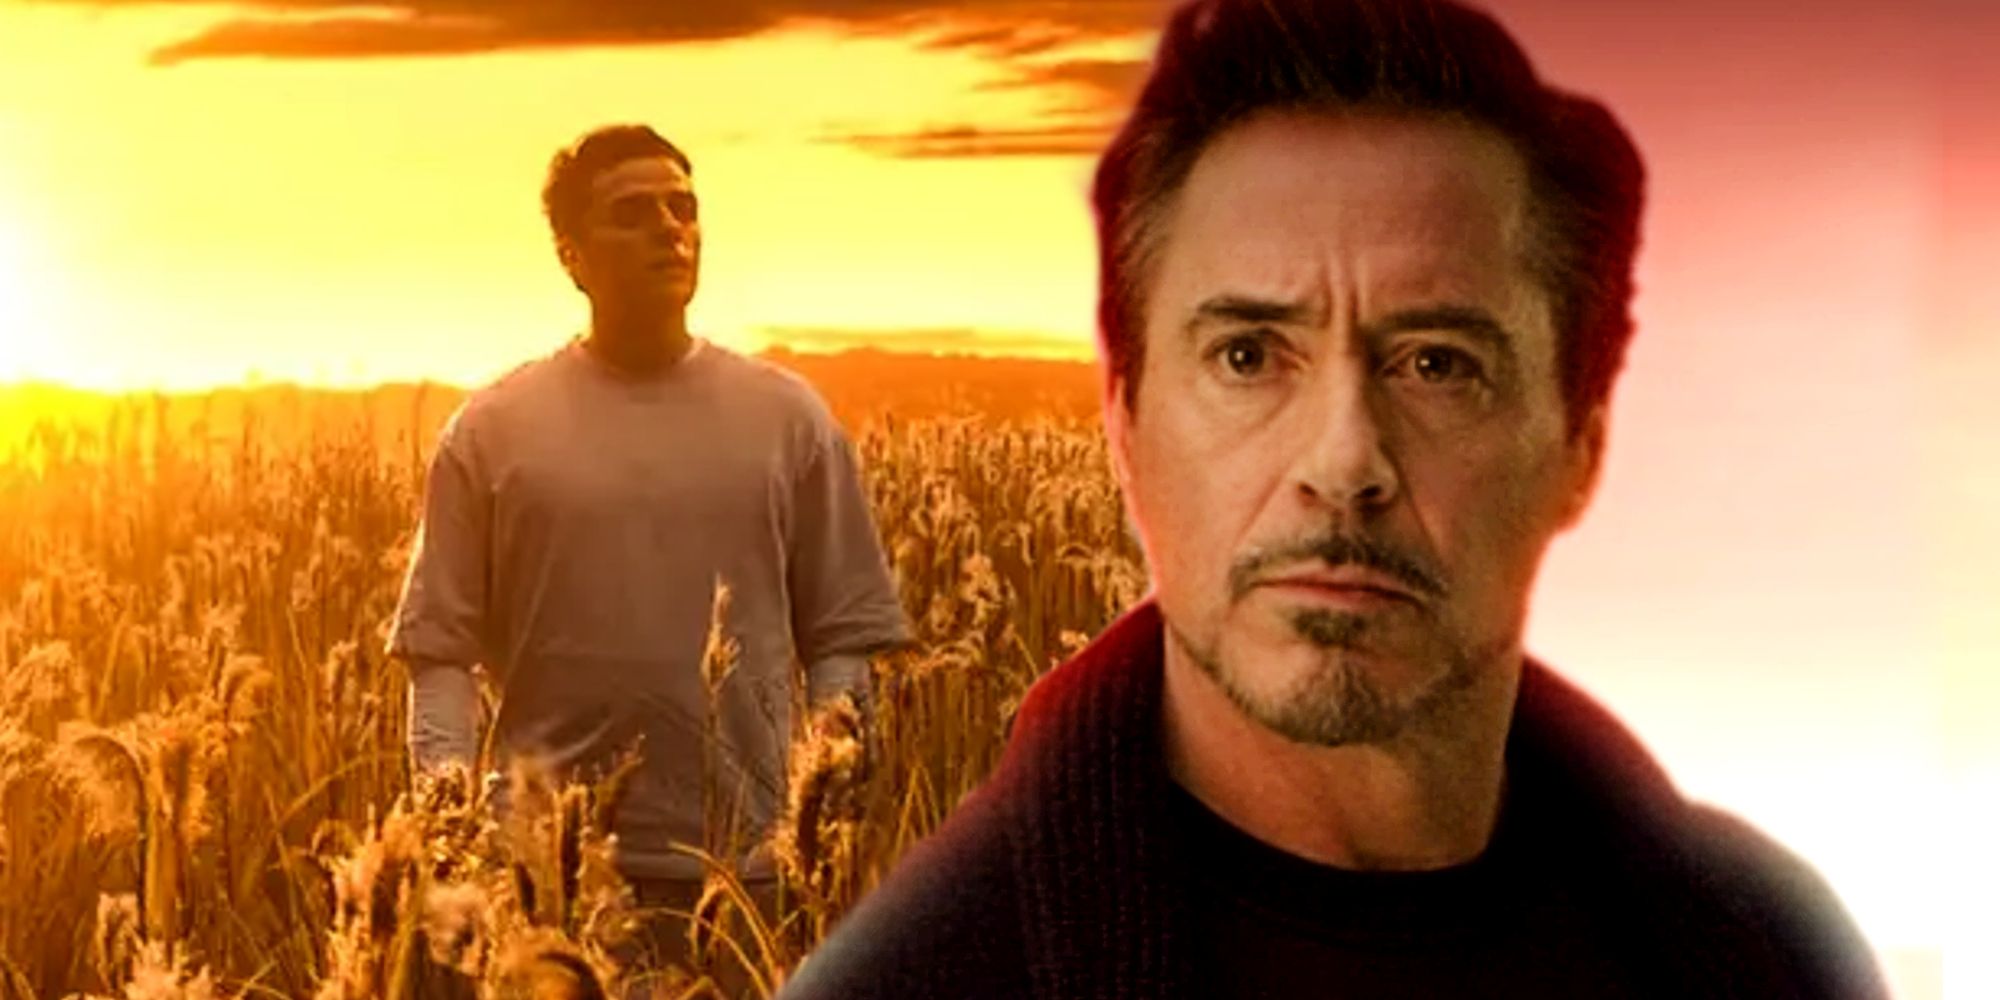 Iron Man in the Soul World and Moon Knight in the Field of Reeds